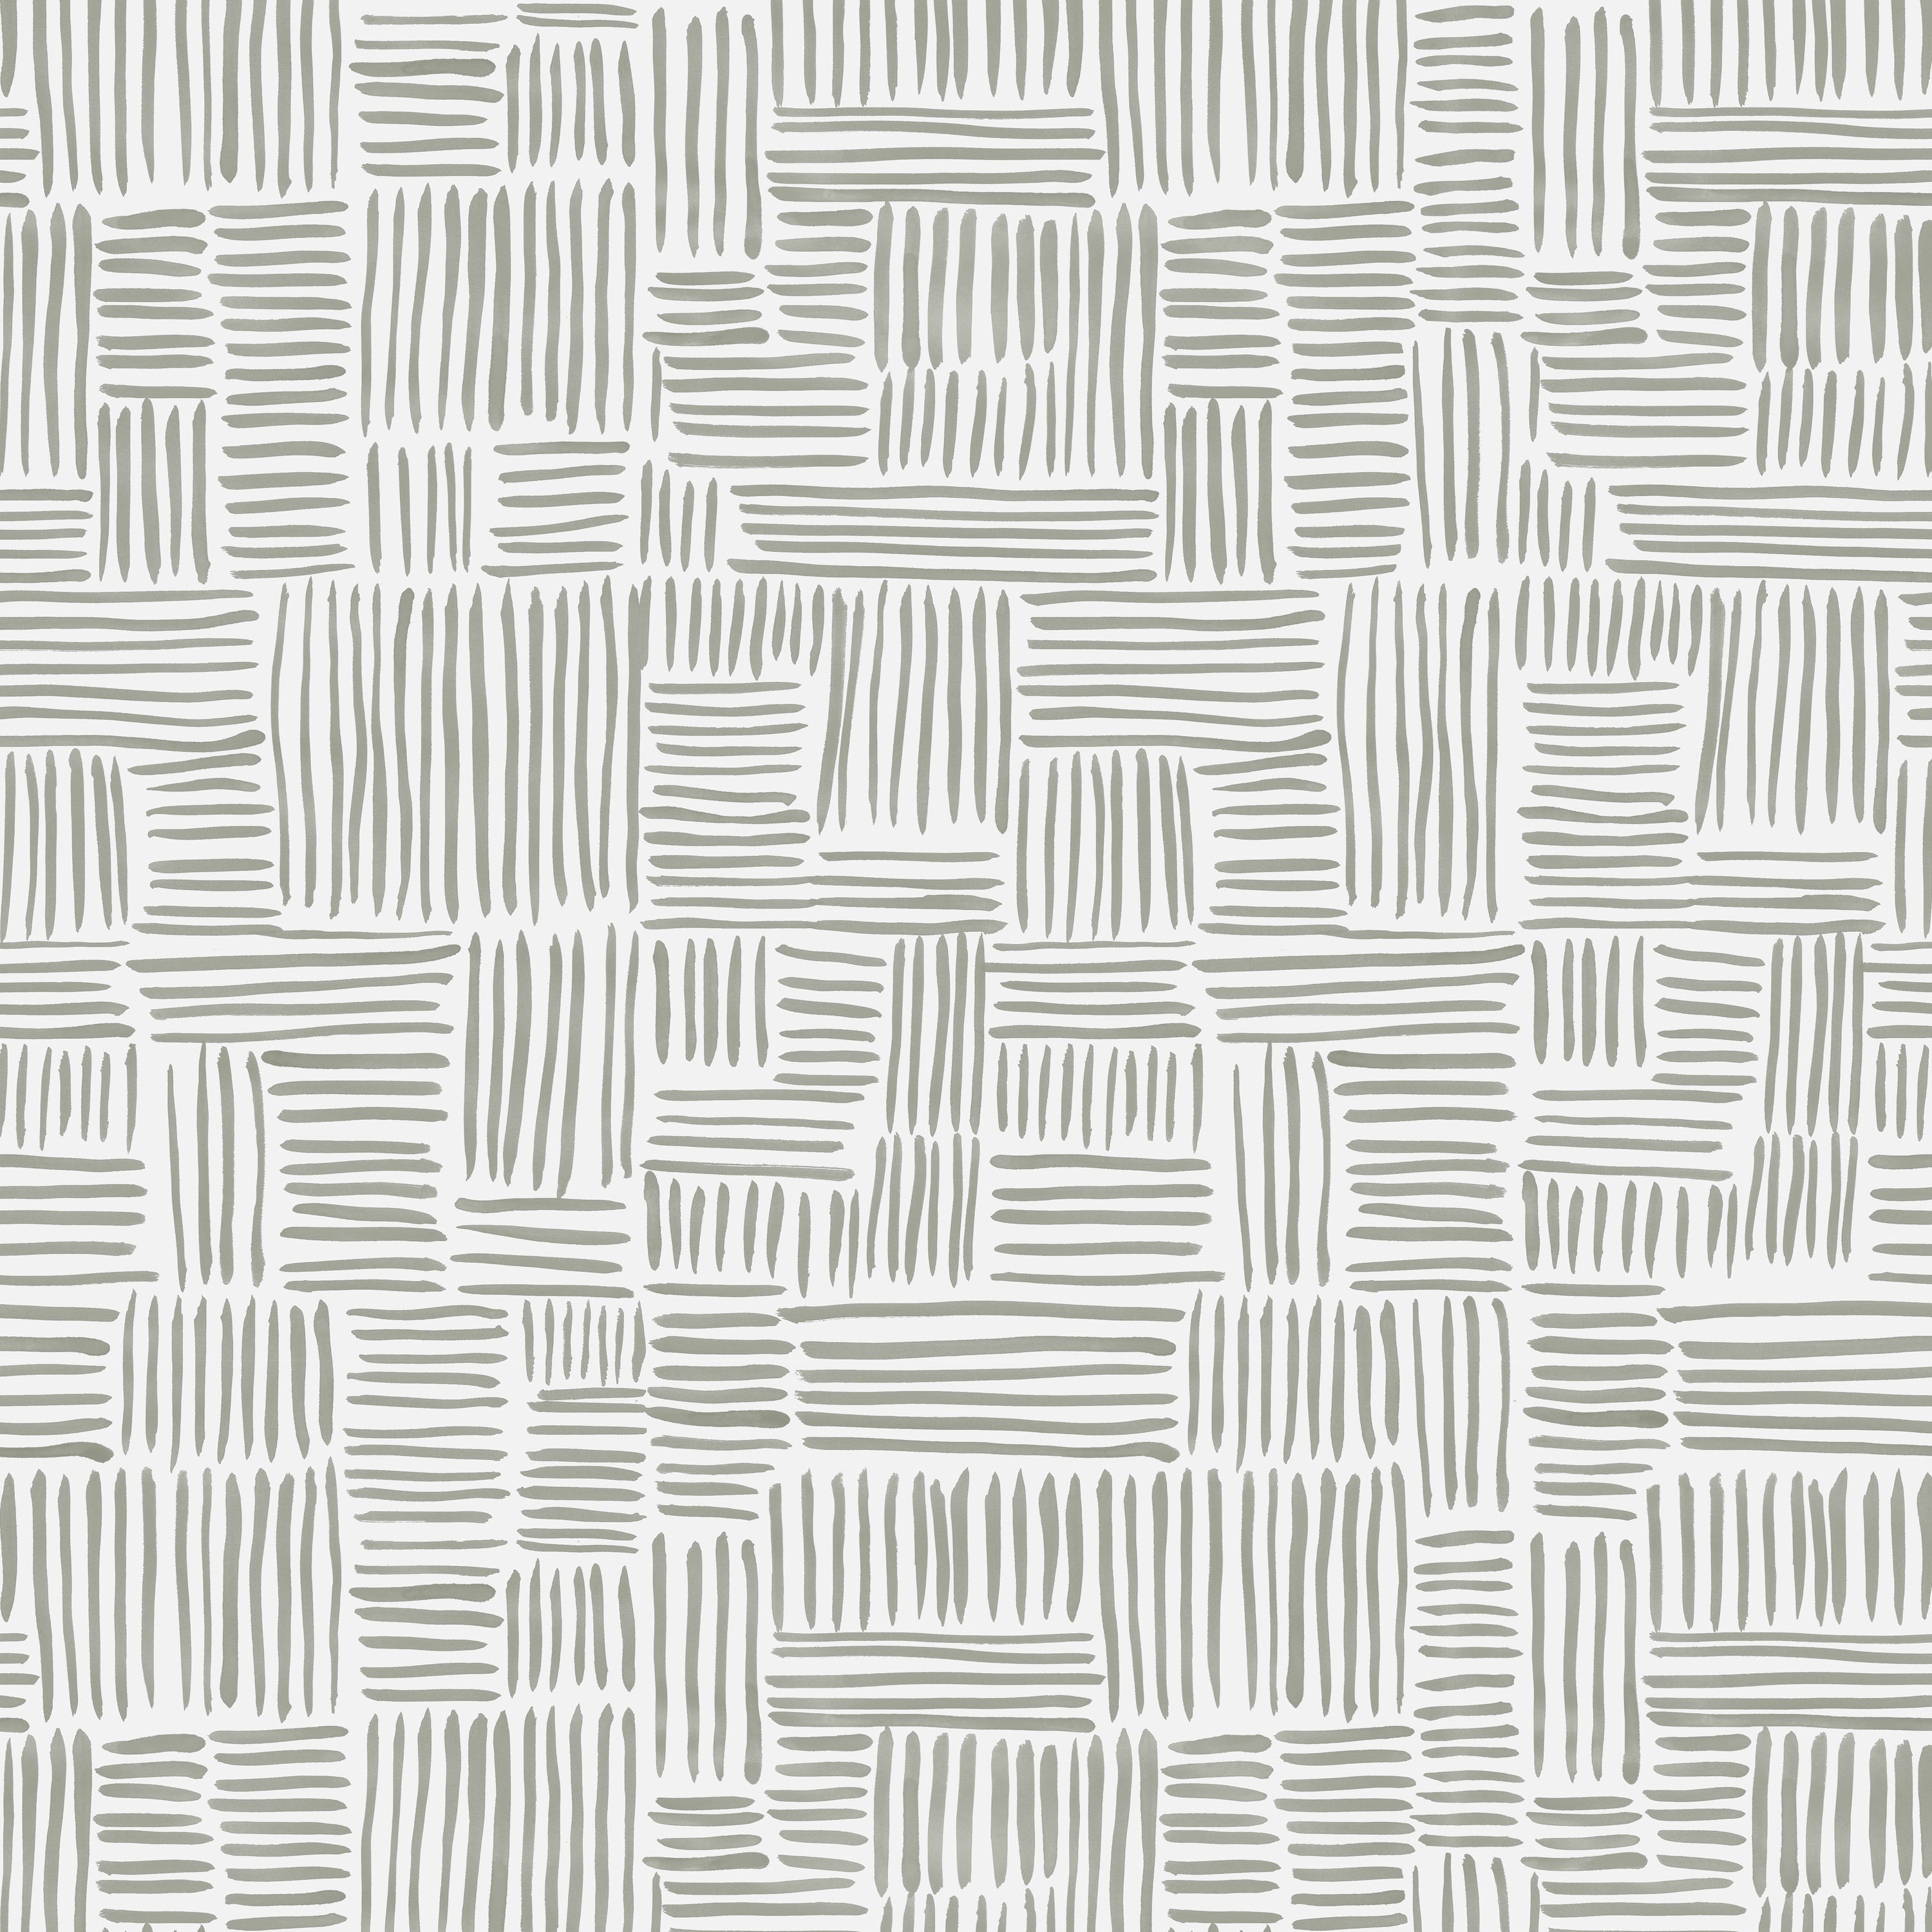 Detail of wallpaper in a directional dash pattern in green-gray on a white field.